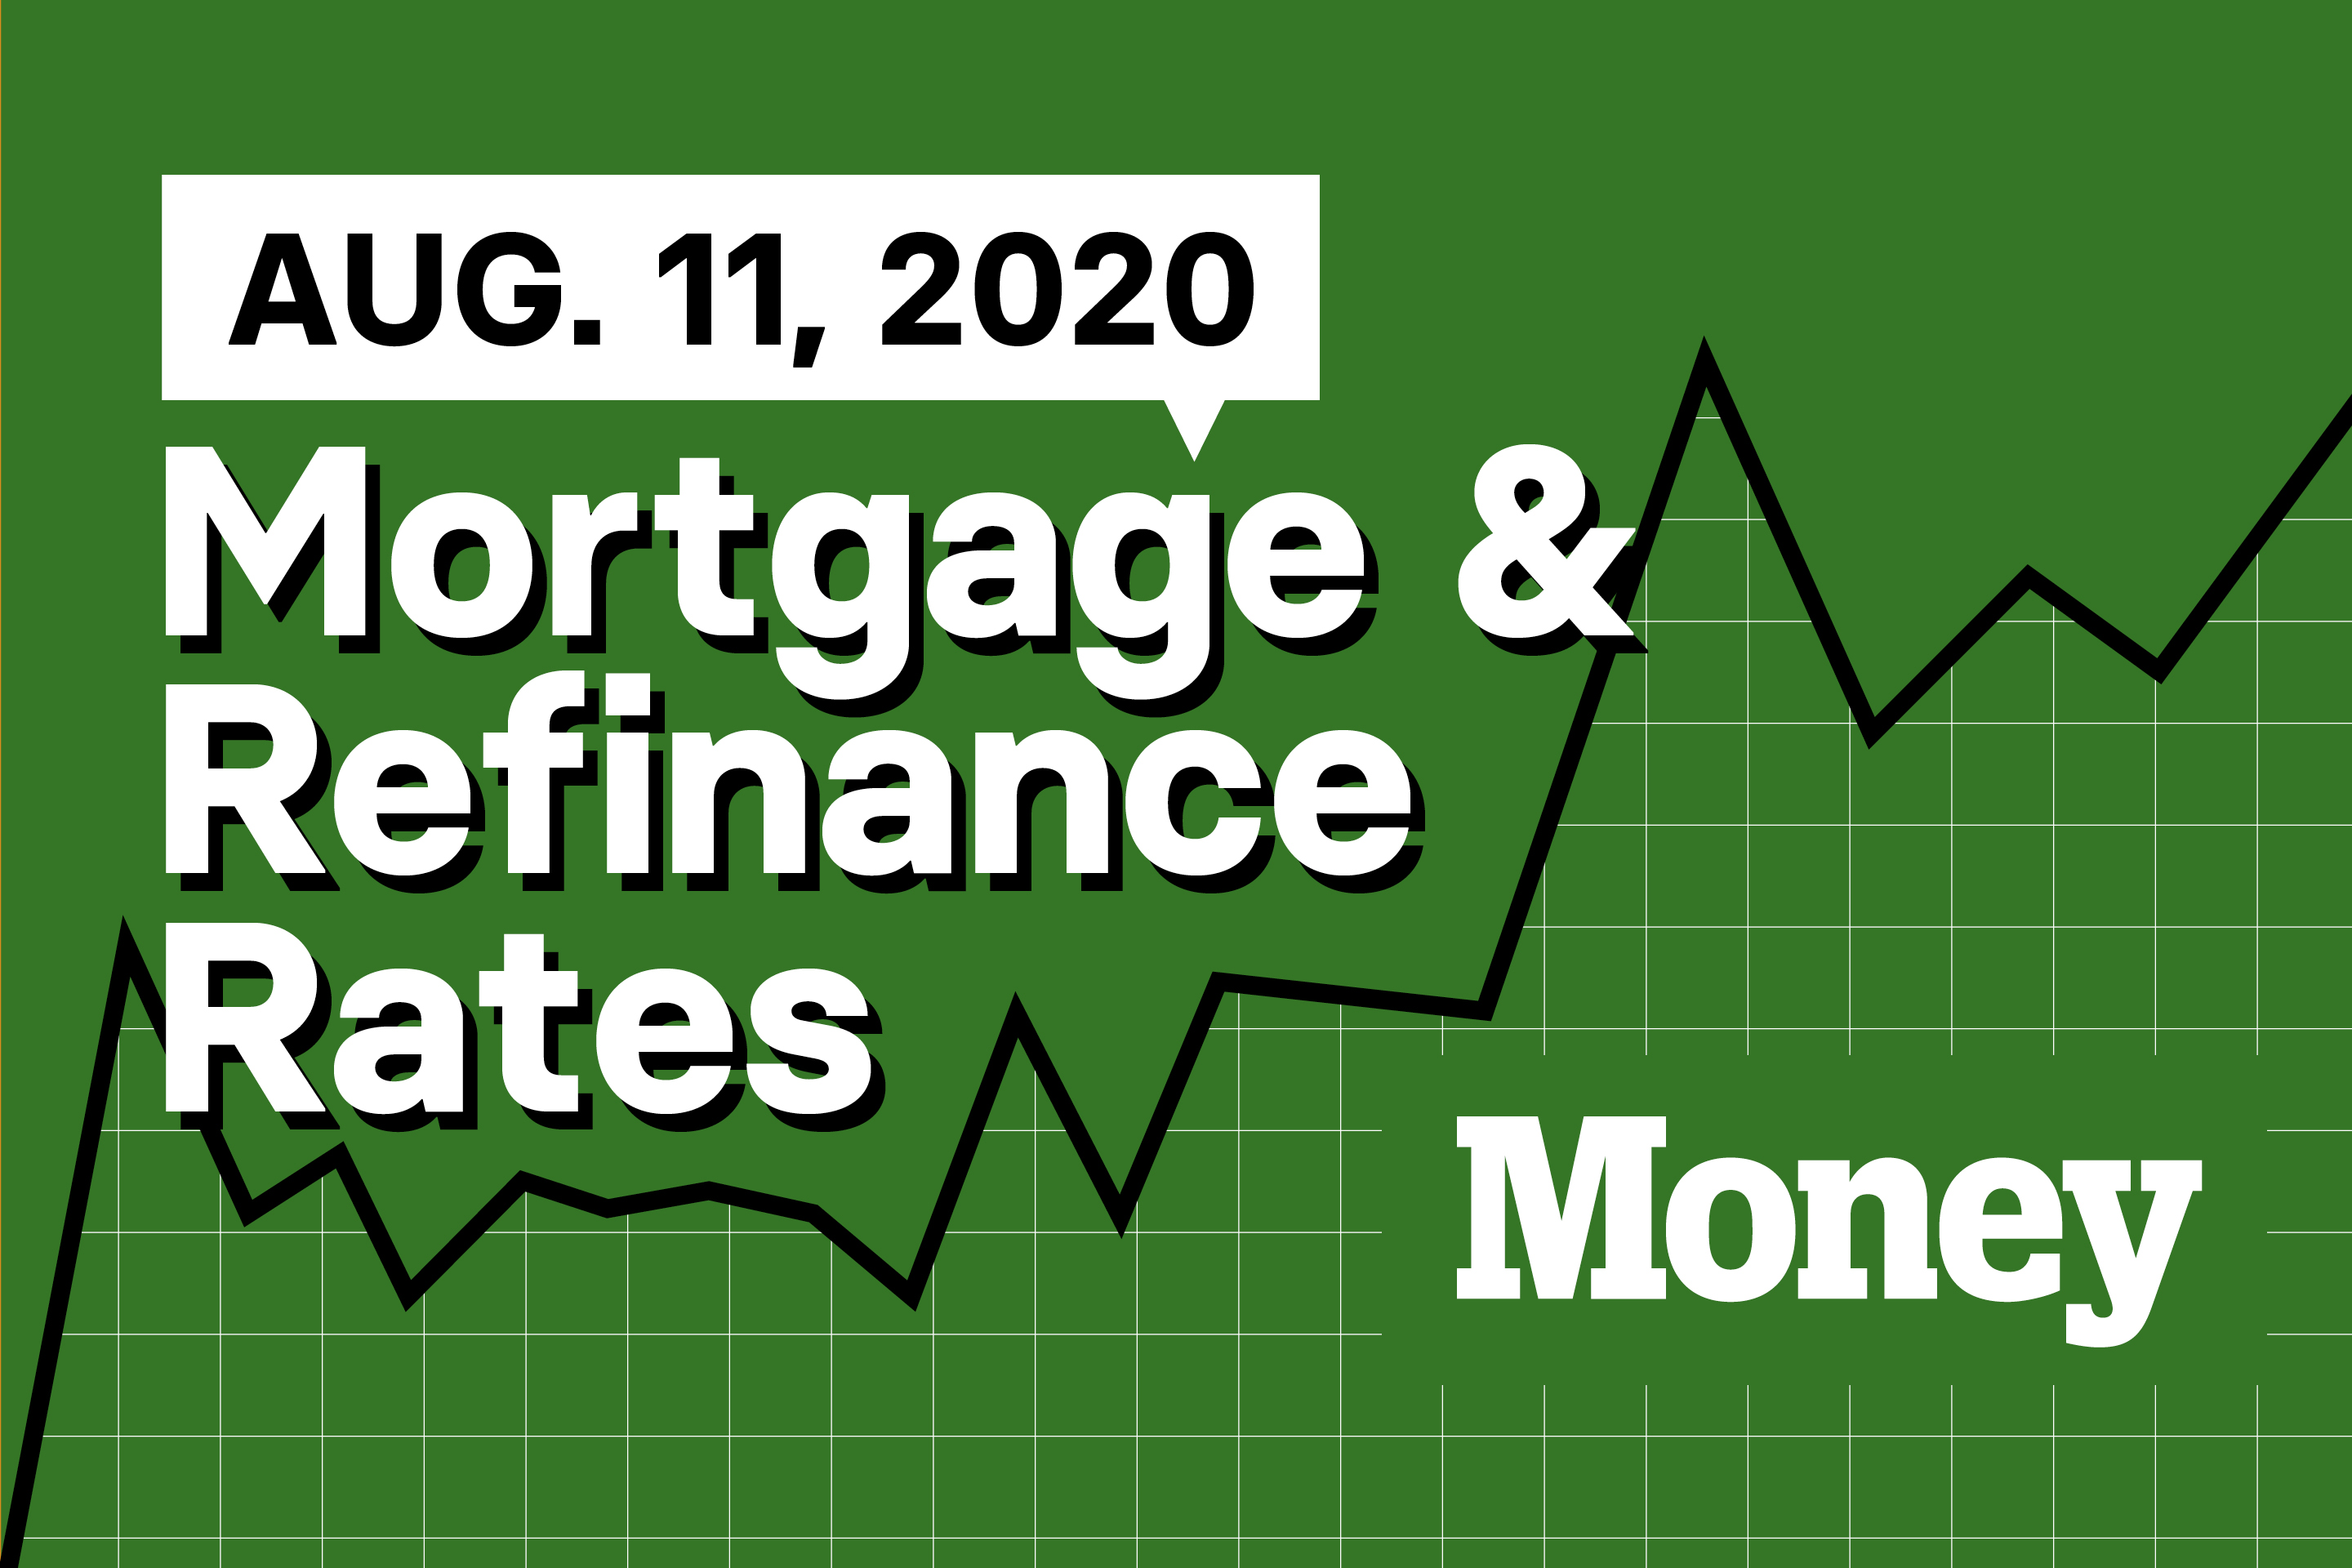 Here Are Today's Best Mortgage & Refinance Rates for August 11, 2020